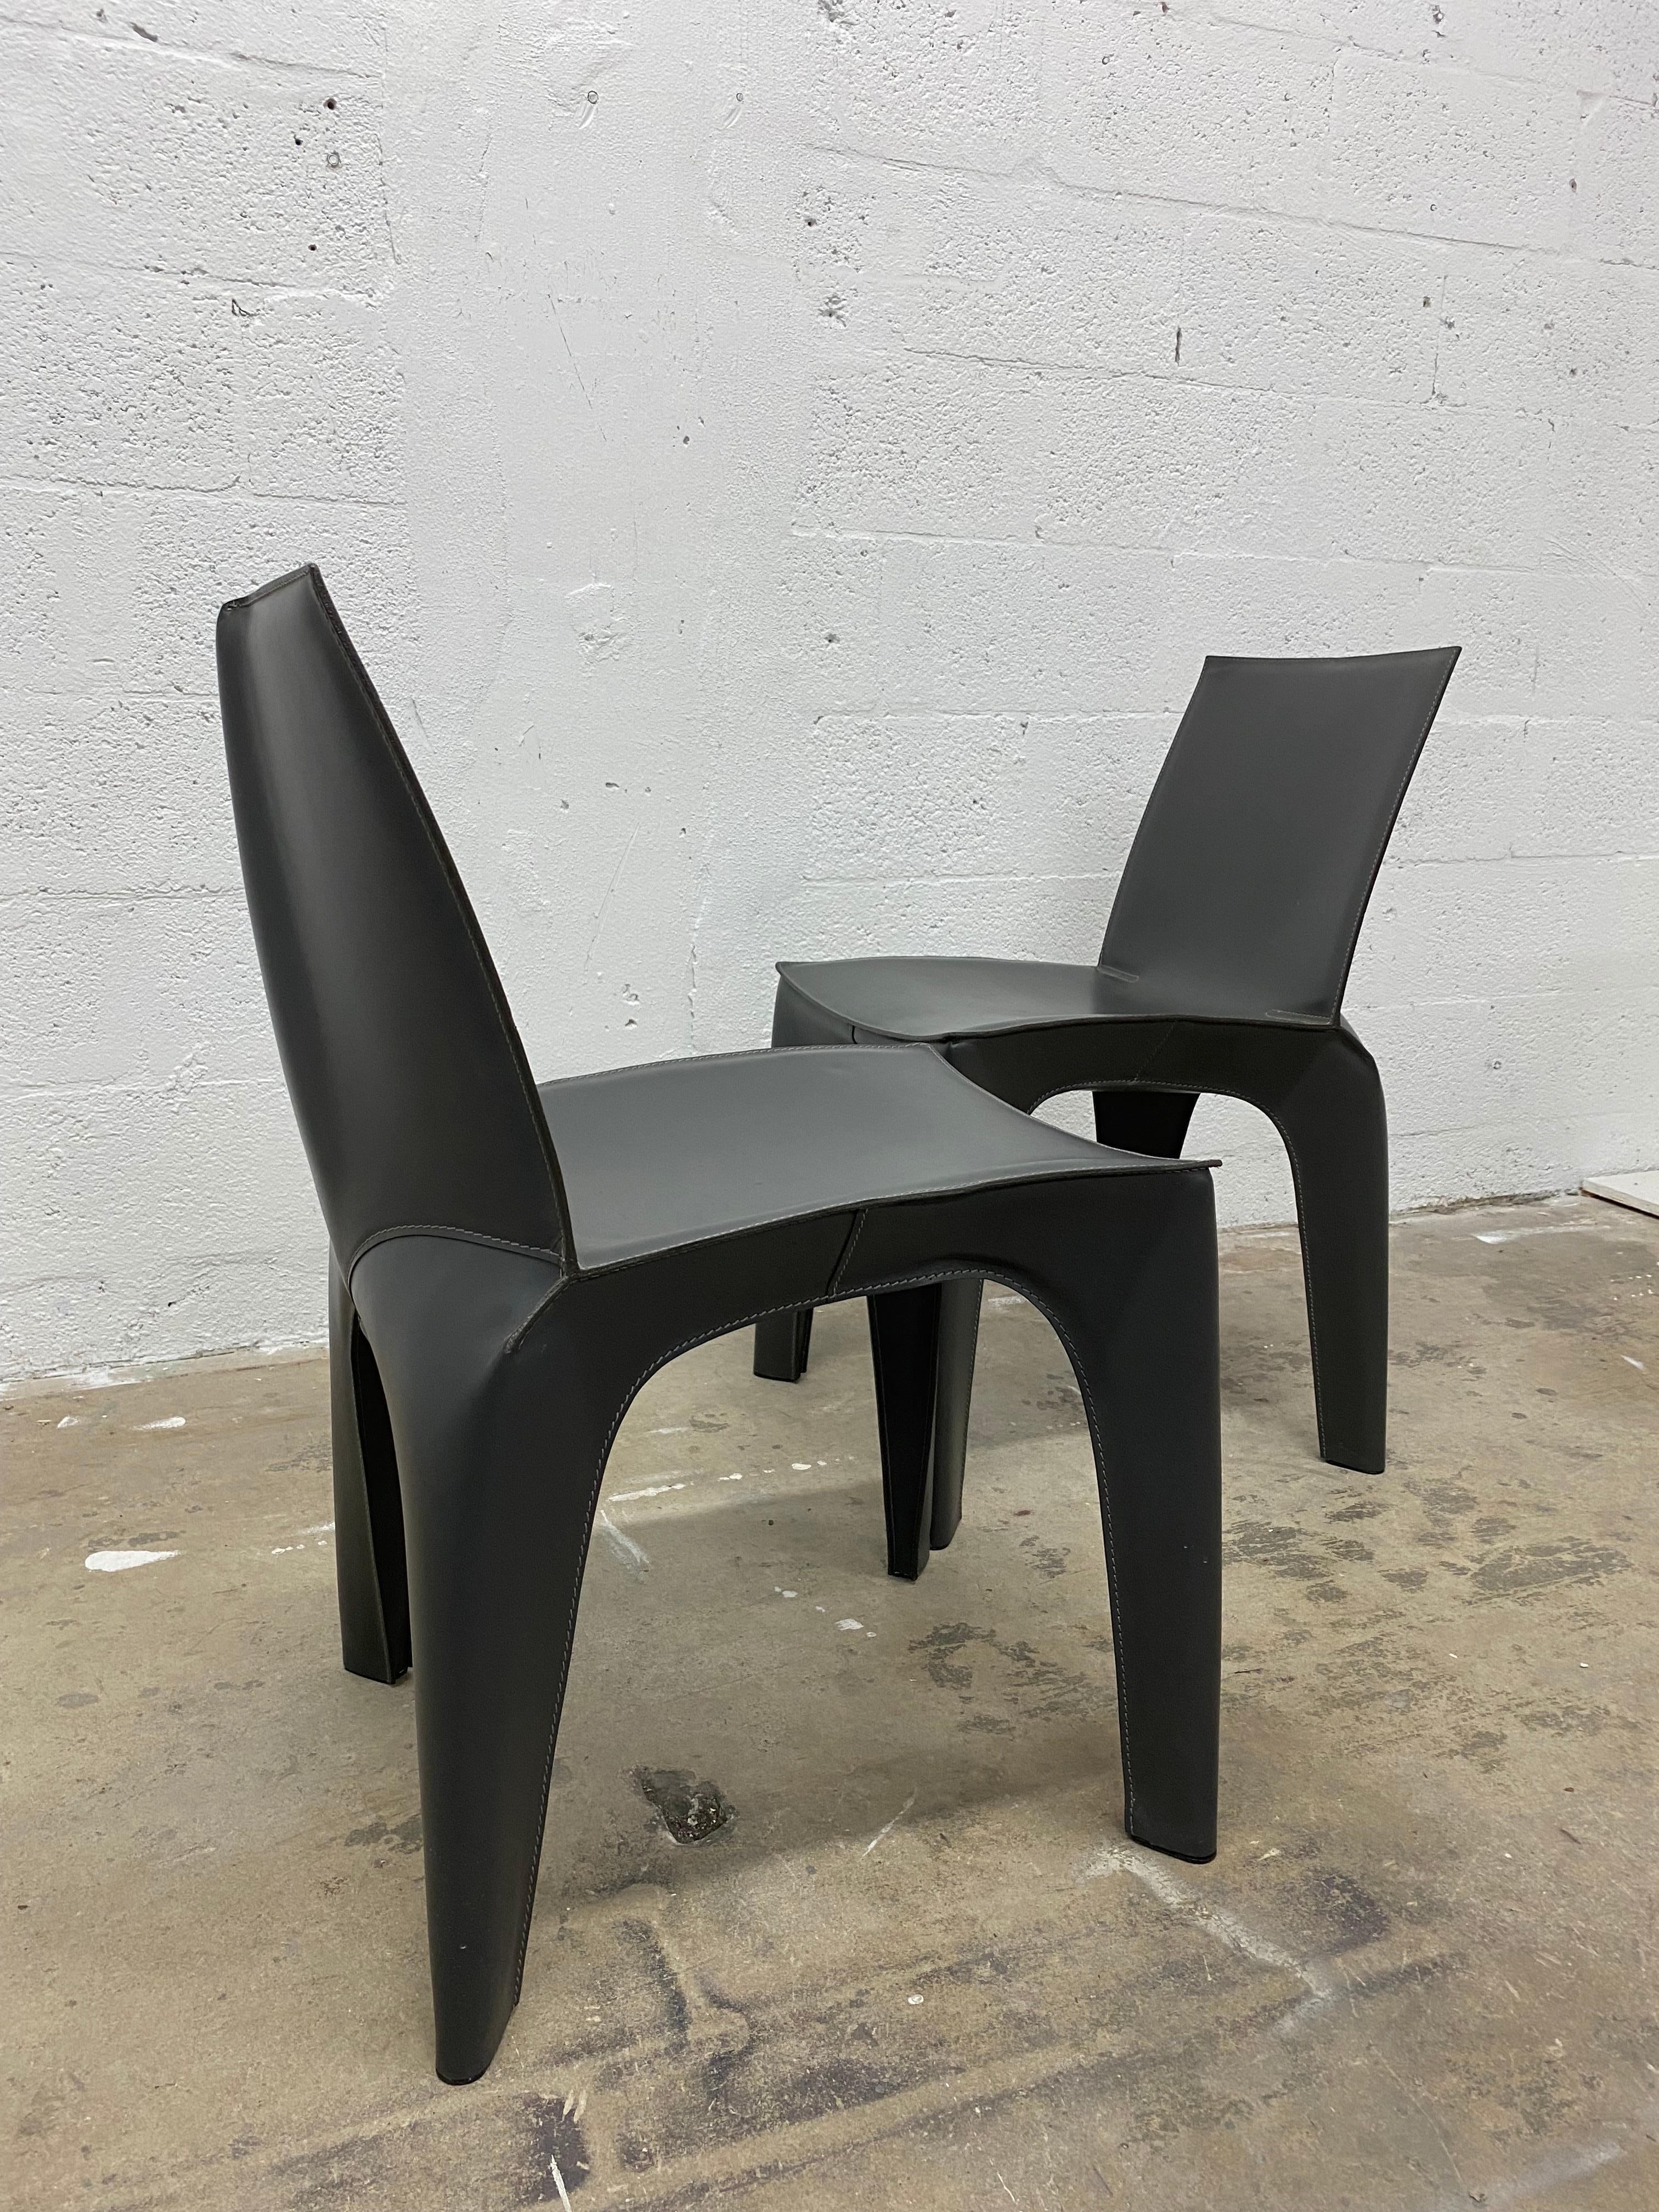 Riccardo Blumer & Matteo Borghi BB Leather Dining Chairs for Poliform, a Pair For Sale 1